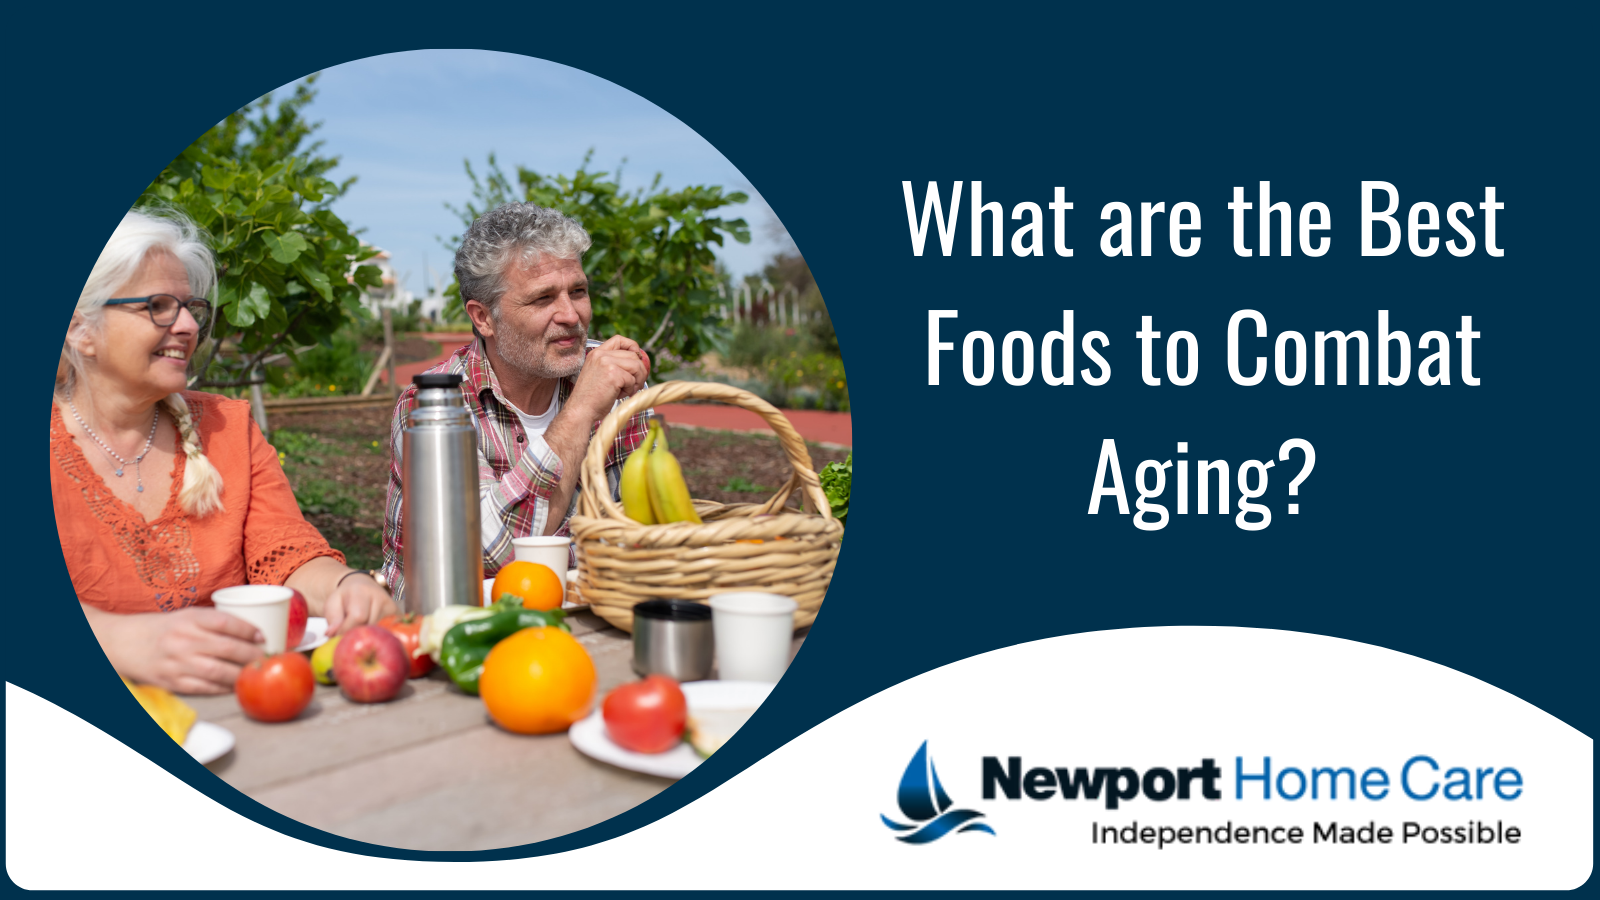 What are the Best Foods to Combat Aging?